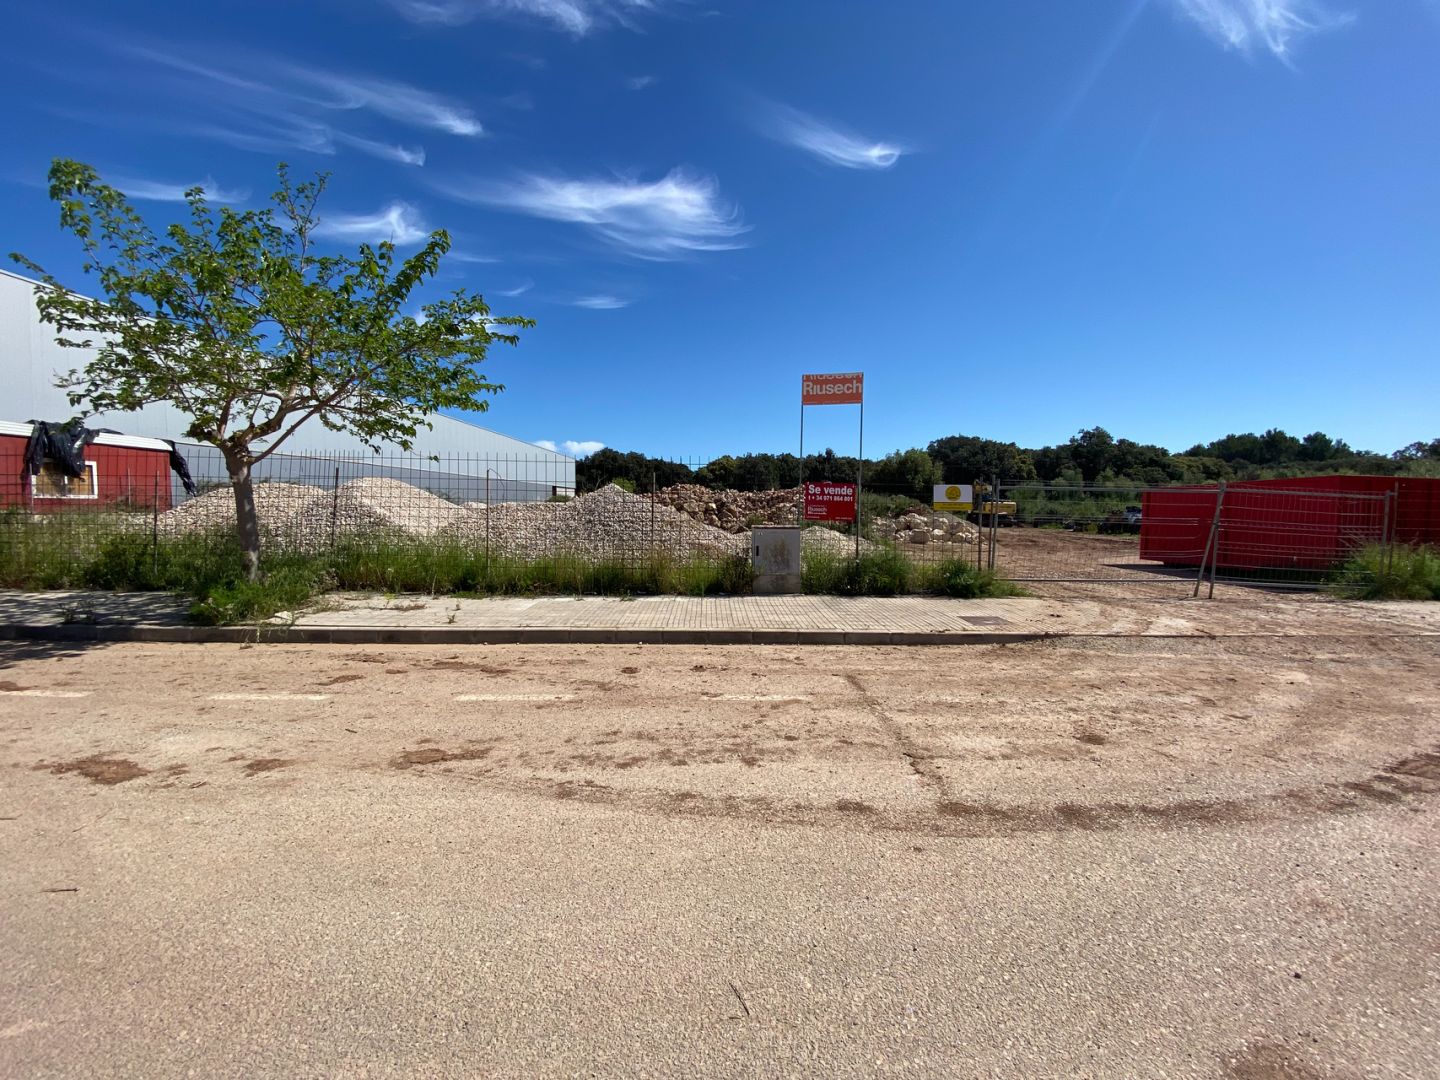 Comercial Land for sale in POLLENSA 1